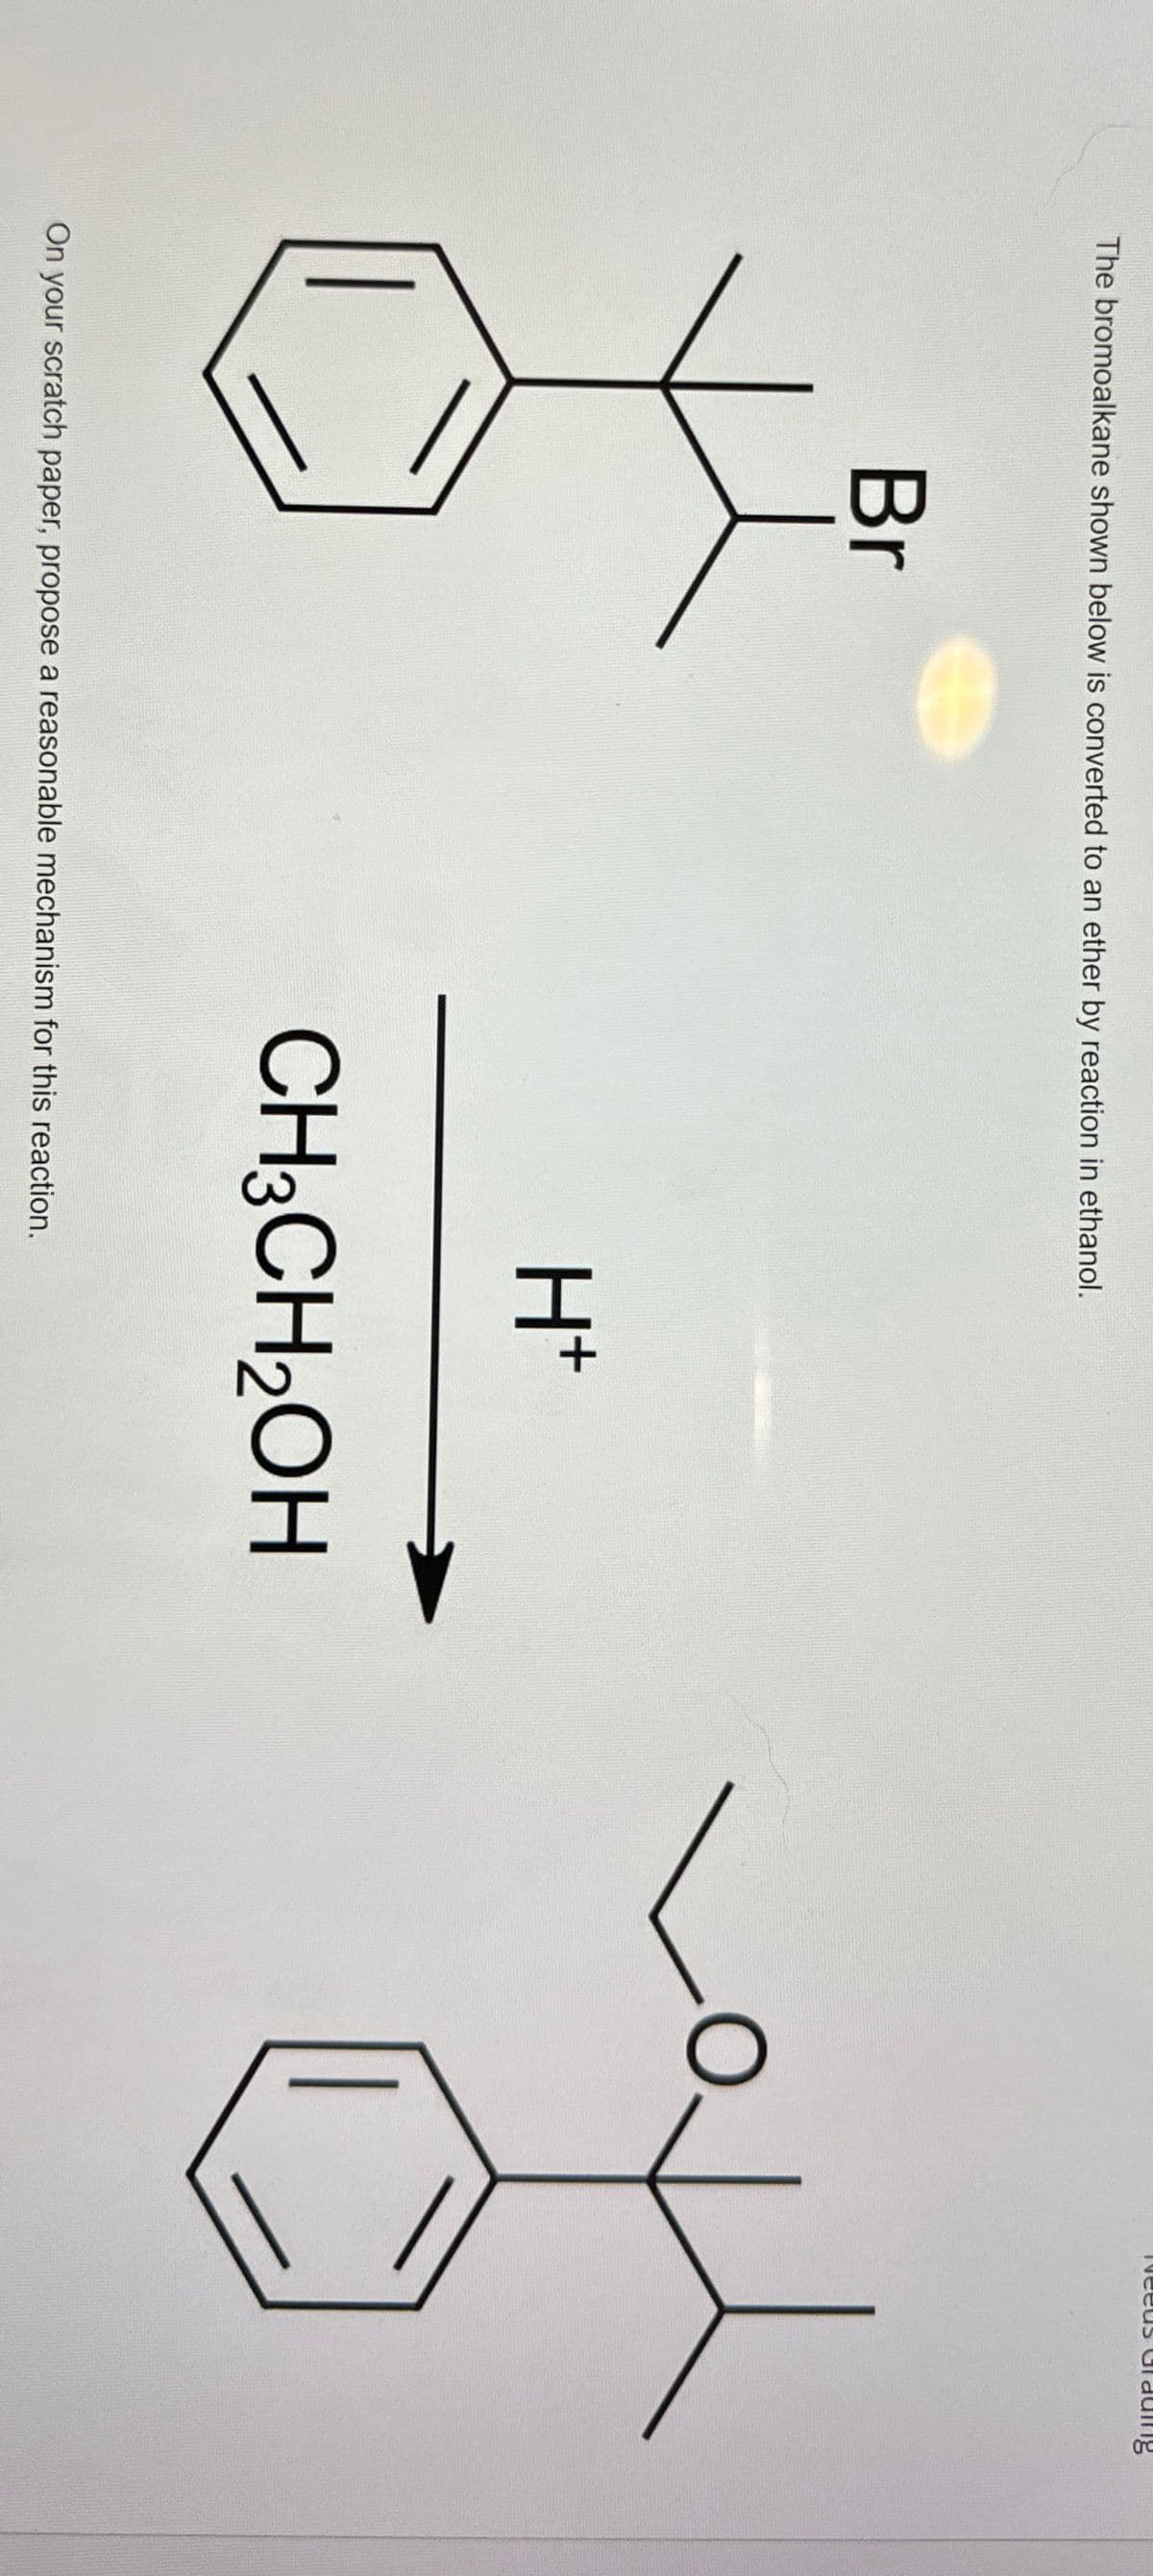 The bromoalkane shown below is converted to an ether by reaction in ethanol.
Br
H+
CH3CH2OH
On your scratch paper, propose a reasonable mechanism for this reaction.
Weeus
ading